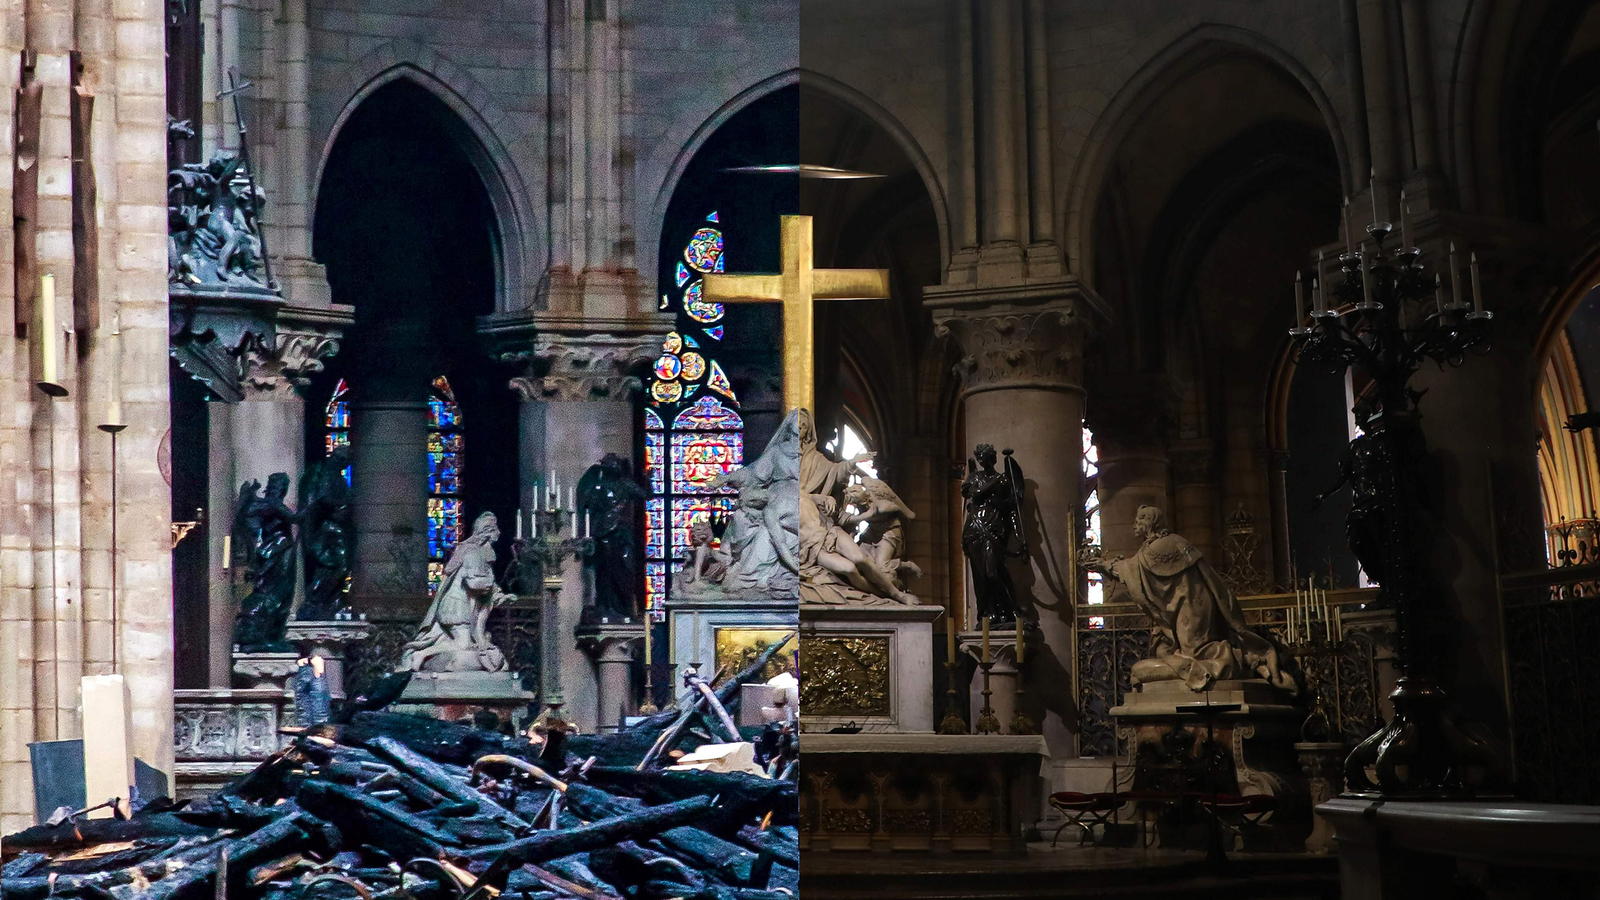 Notre-Dame fire: New images reveal devastation caused by blaze | World